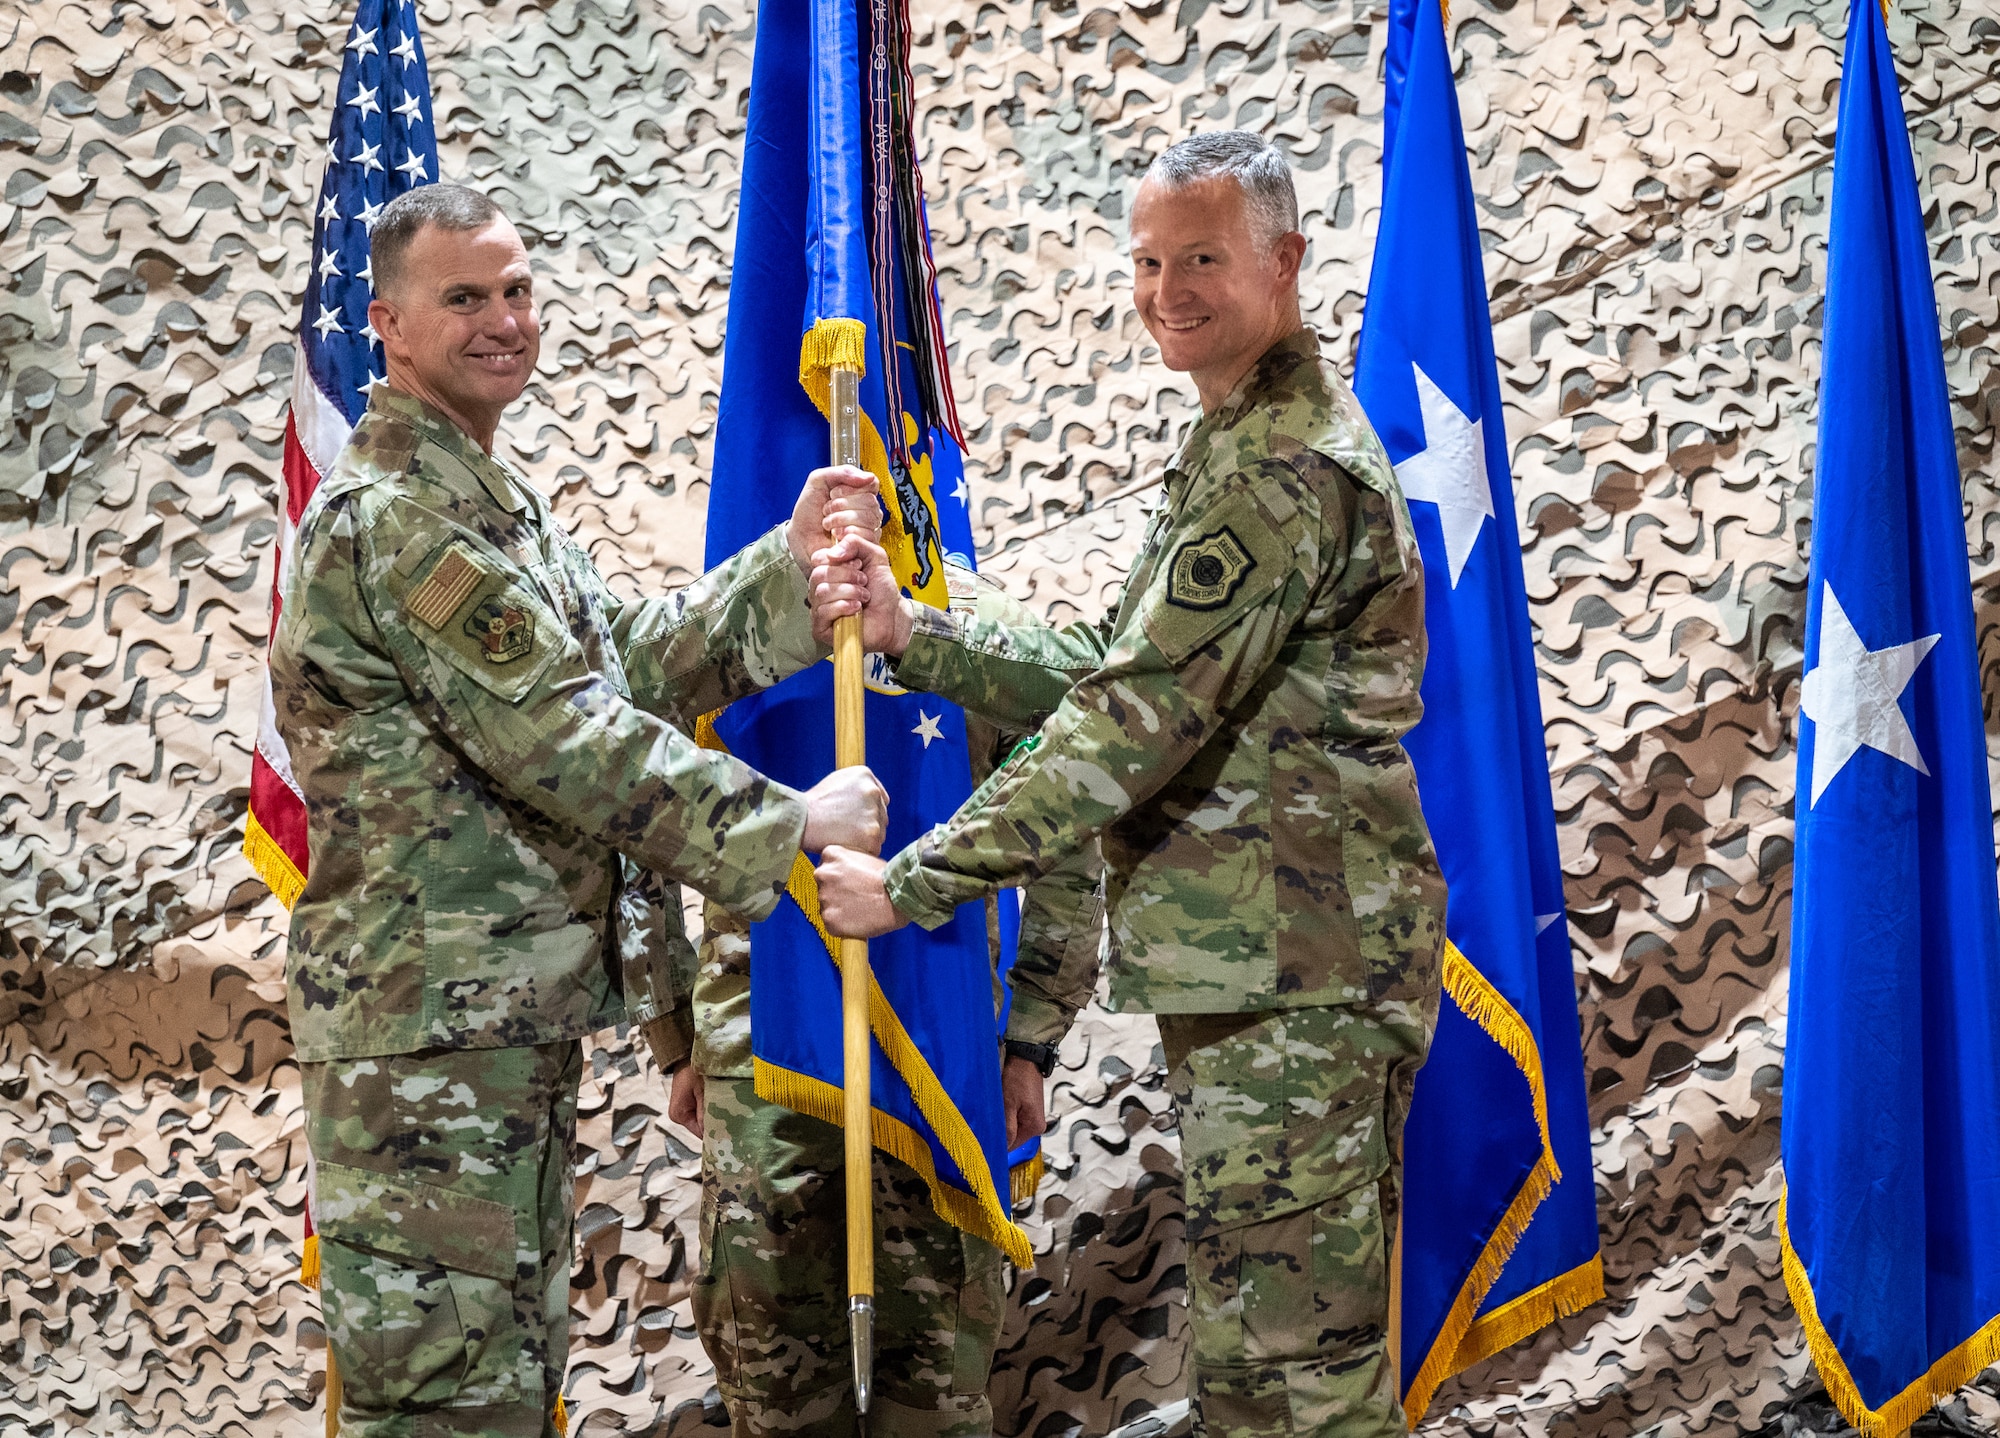 U.S. Air Force Lt. Gen. Gregory Guillot, Ninth Air Force (Air Forces Central) commander, exchanges the 332d Air Expeditionary Wing guidon with U.S. Air Force Brig. Gen. R. Ryan Messer, 332d AEW incoming commander, during a change of command ceremony at an undisclosed location in Southwest Asia, July 3, 2022. A change of command ceremony is a tradition that represents a formal transfer of authority and responsibility from the outgoing commander to the incoming commander. (U.S. Air Force photo by Master Sgt. Christopher Parr)